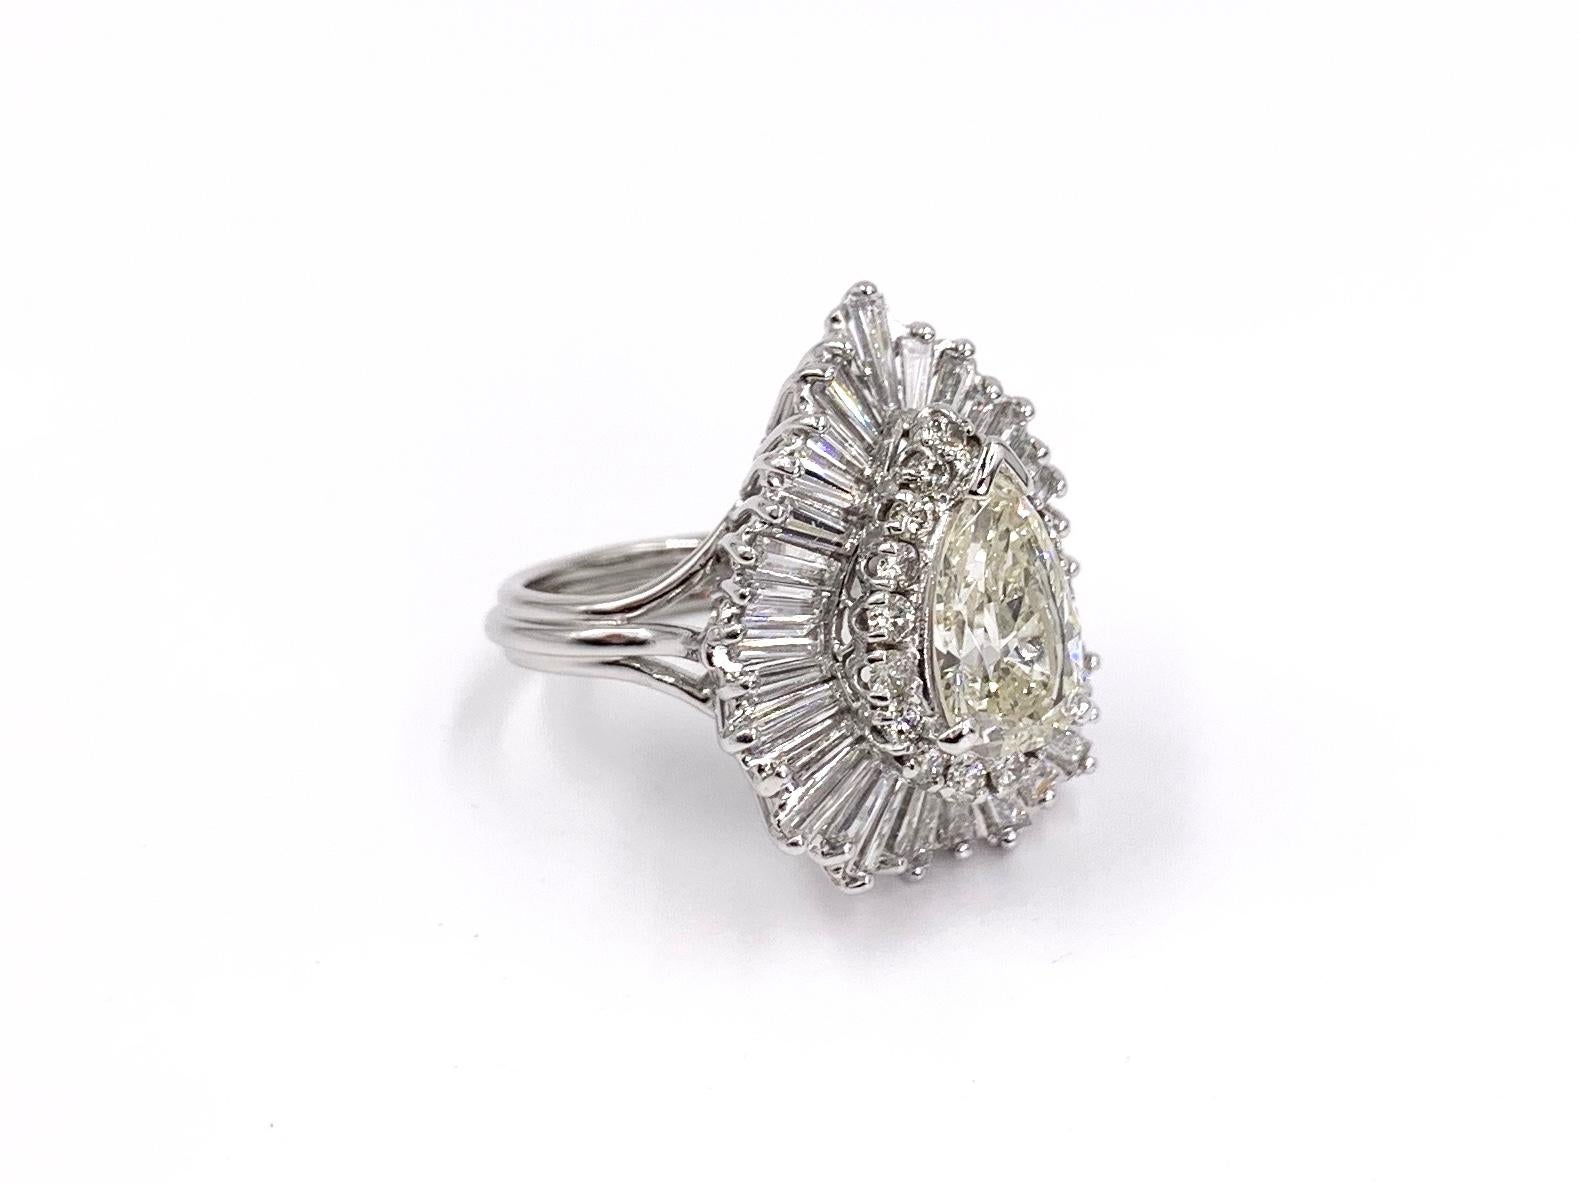 A beautiful 2.07 carat pear shape diamond is perfectly surrounded by a halo of round brilliant diamonds and further adorned with baguette diamonds arranged in a classic ballerina design. Center diamond has been evaluated to be an approximate K